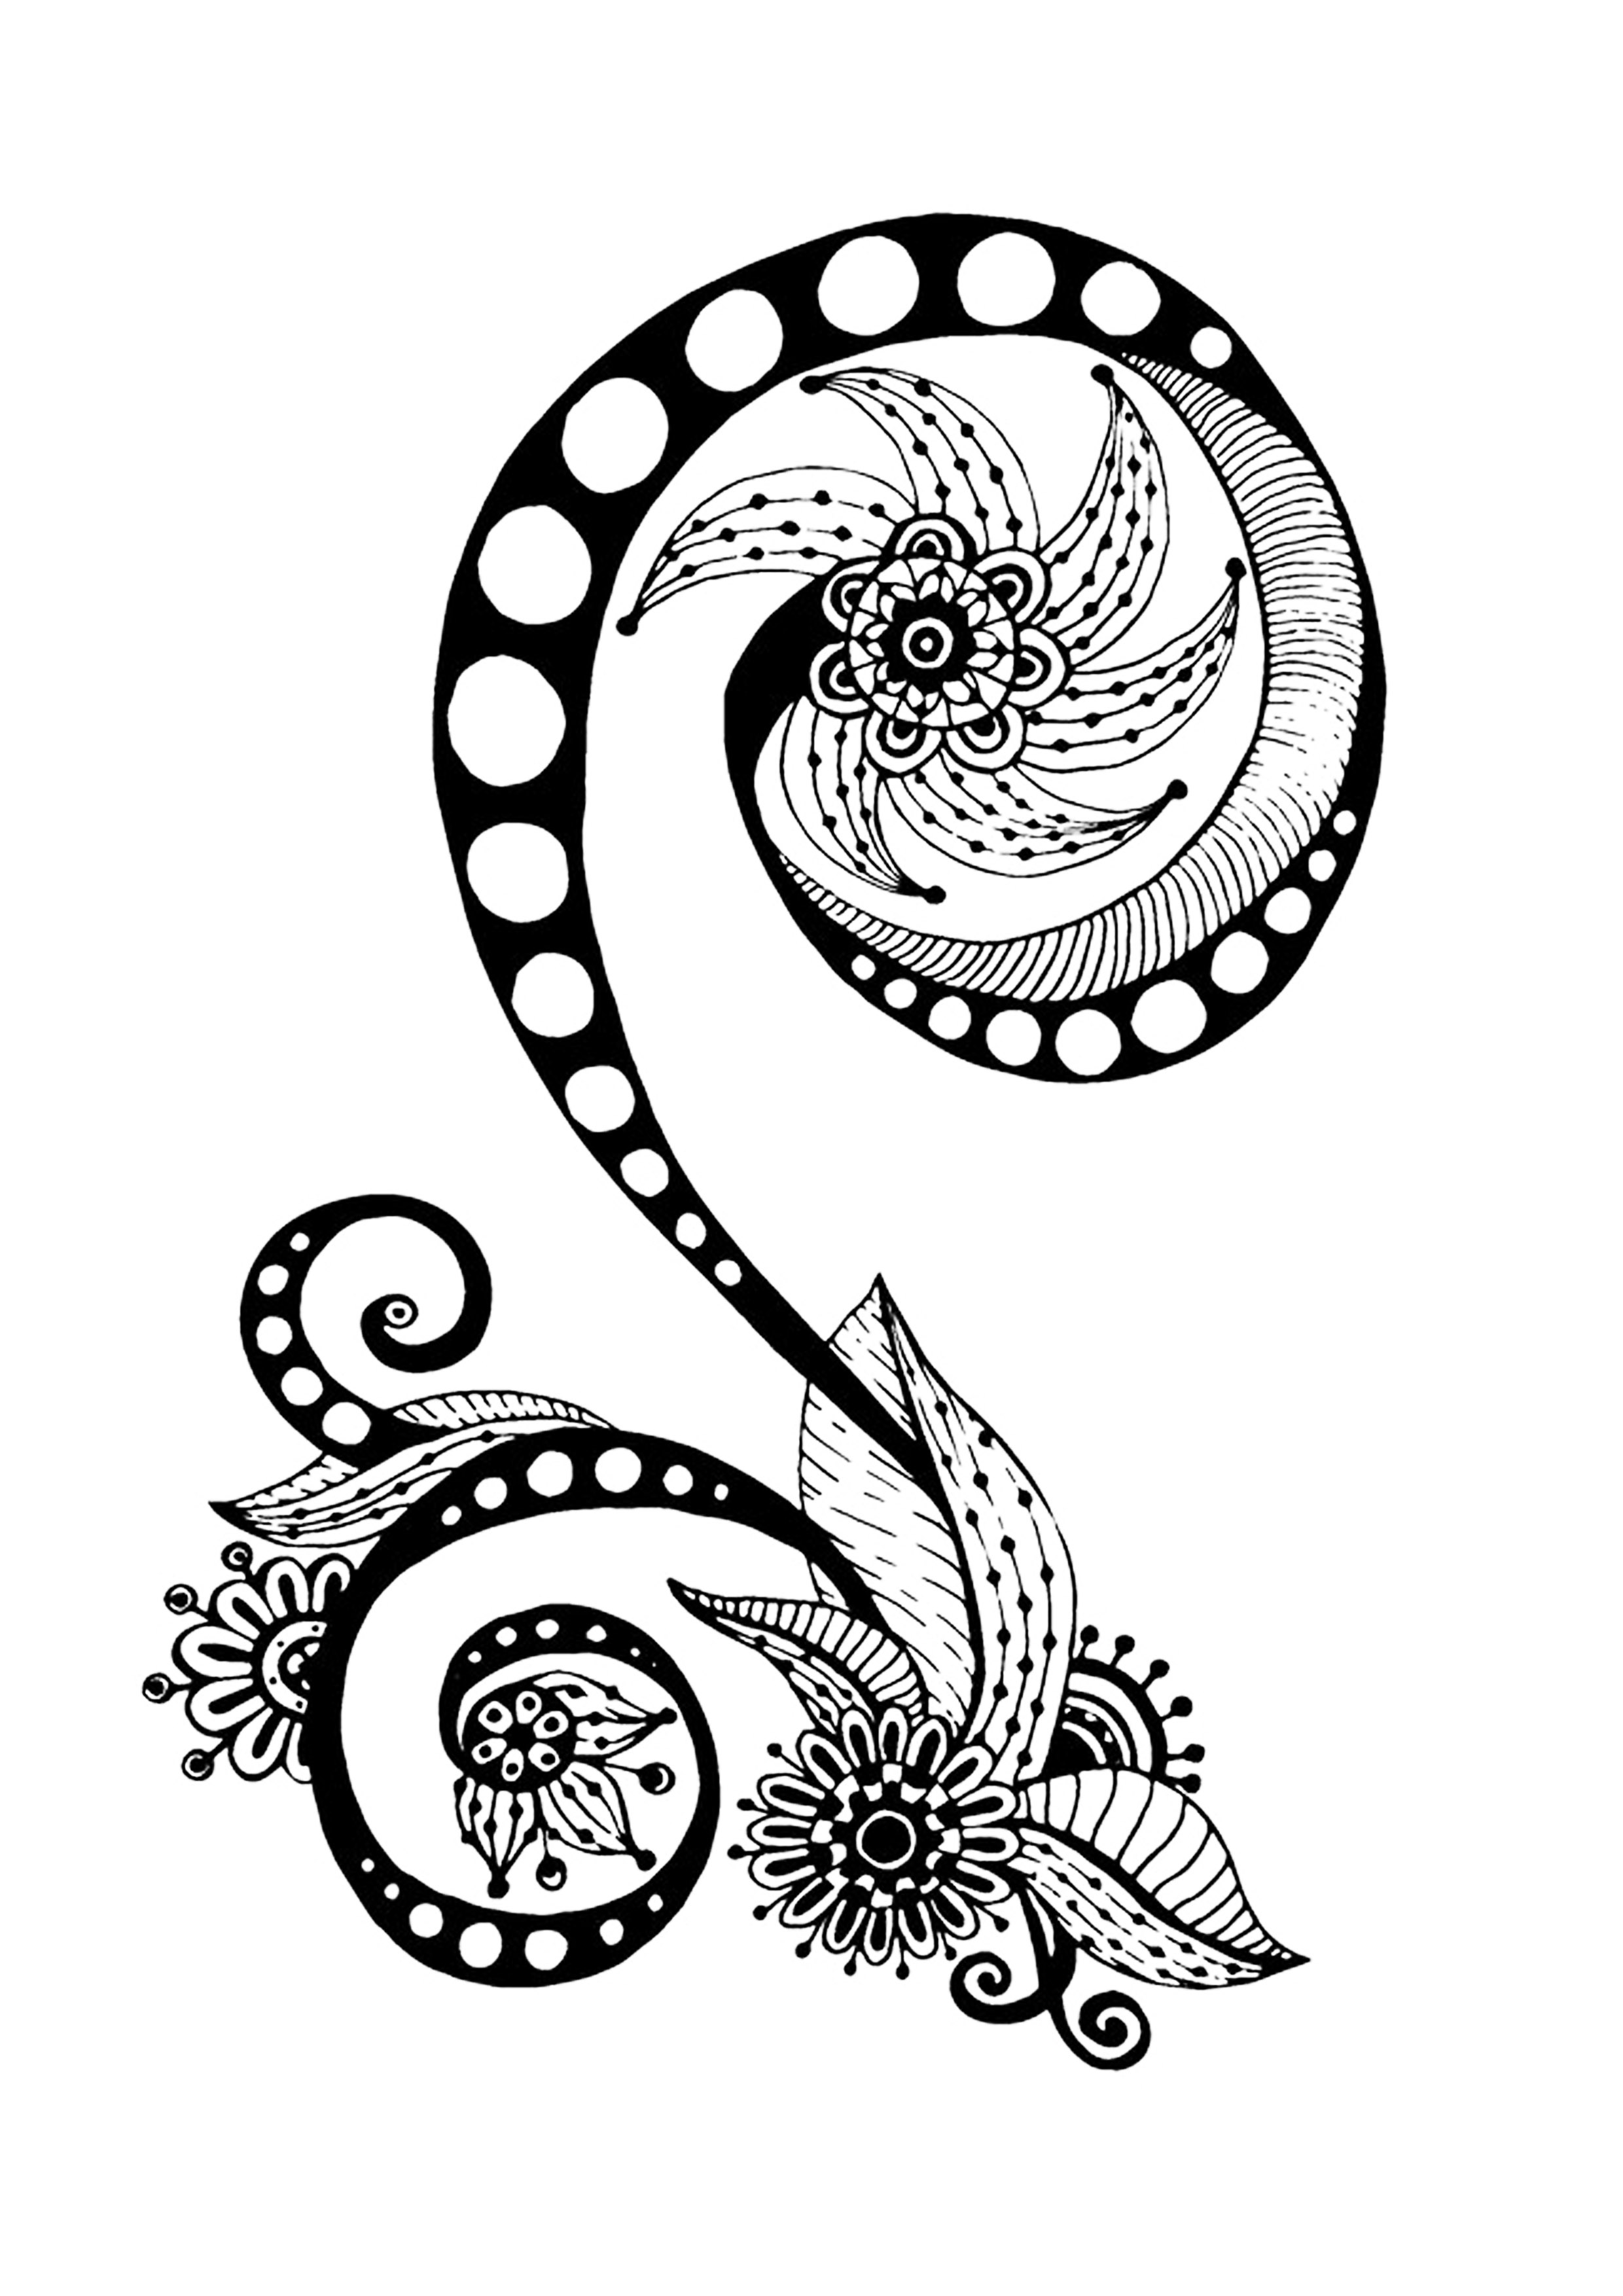 Zen & Anti-stress Coloring page : Abstract pattern inspired by flowers : n°11